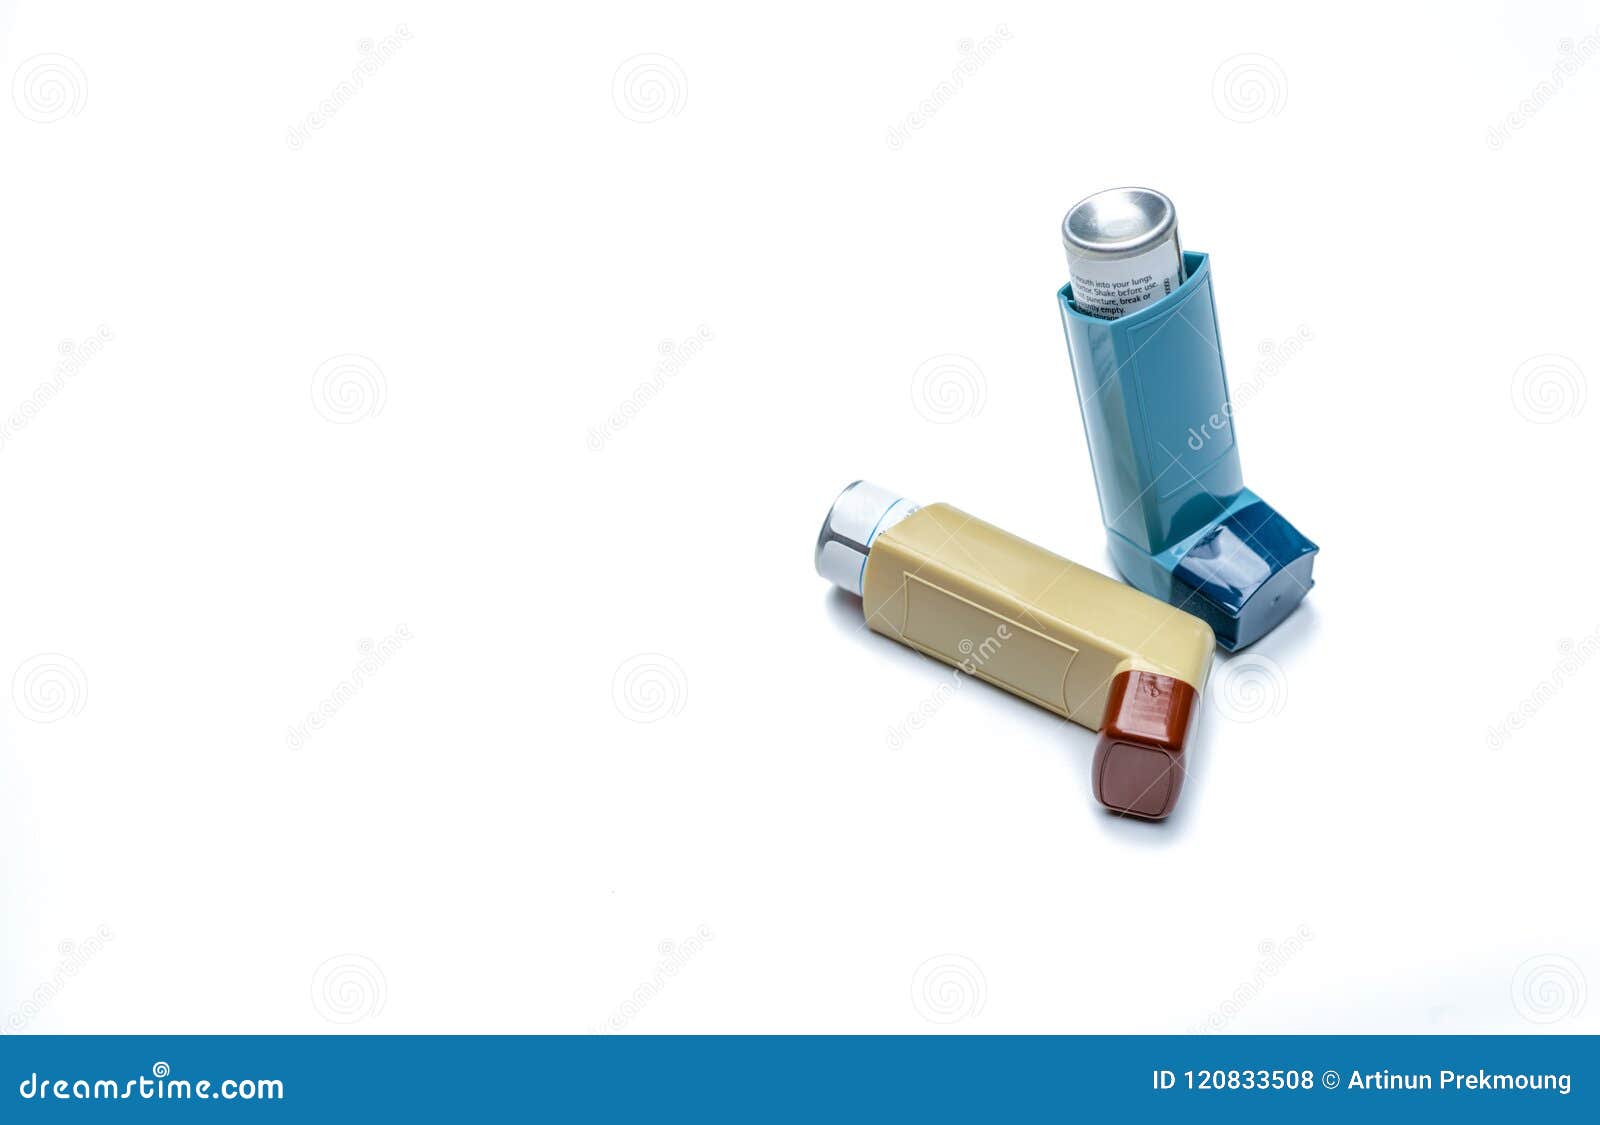 asthma inhaler. asthma controller, reliever equipment. steroids and bronchodilator drug for asthma and chronic bronchitis.